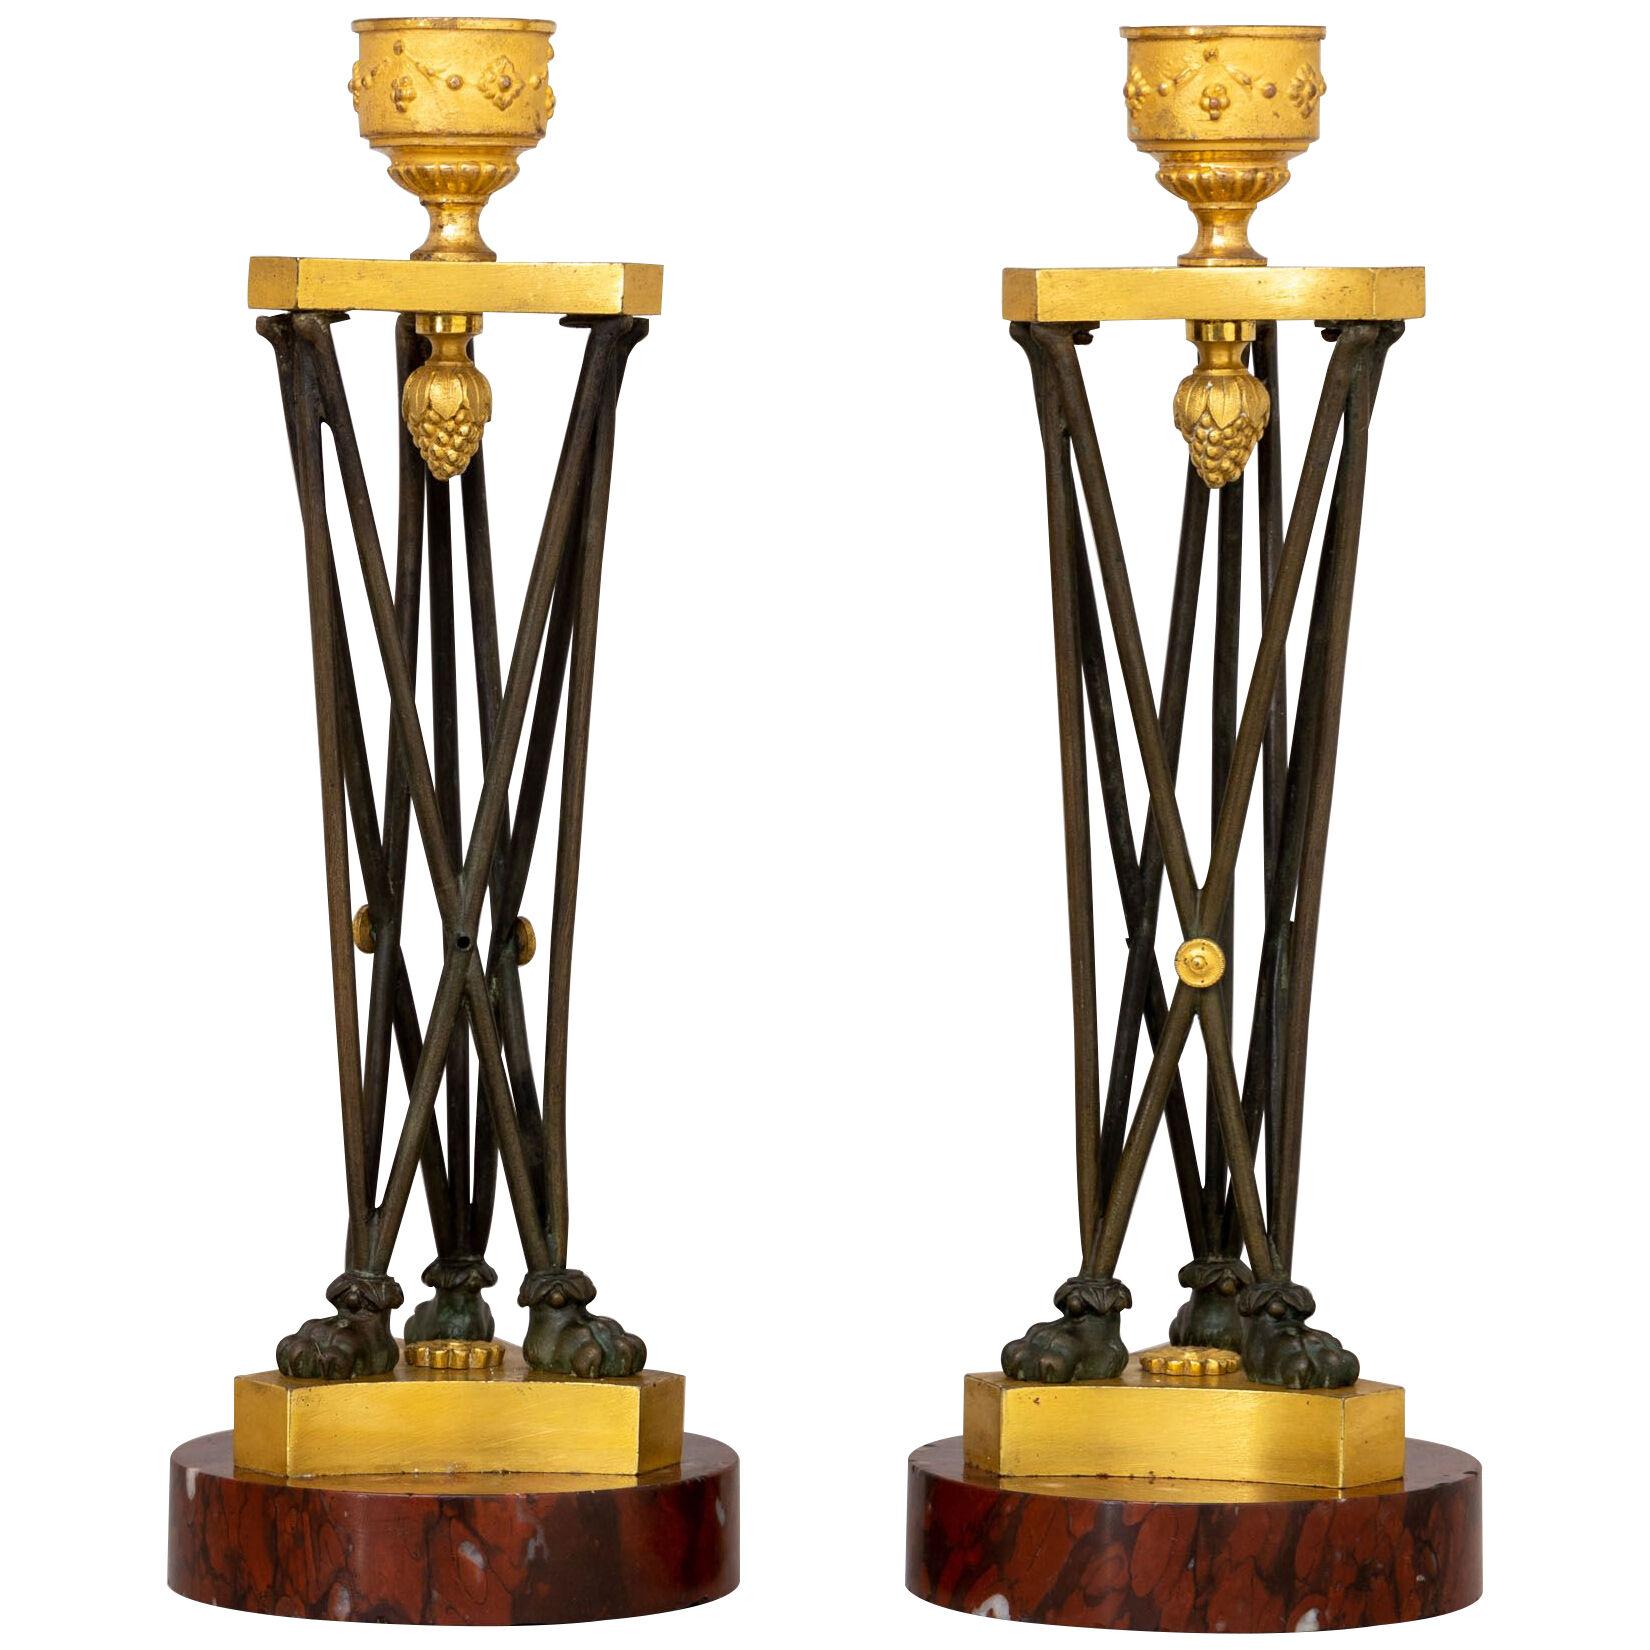 Pair of Empire style Candlesticks, 2nd Half of 19th Century